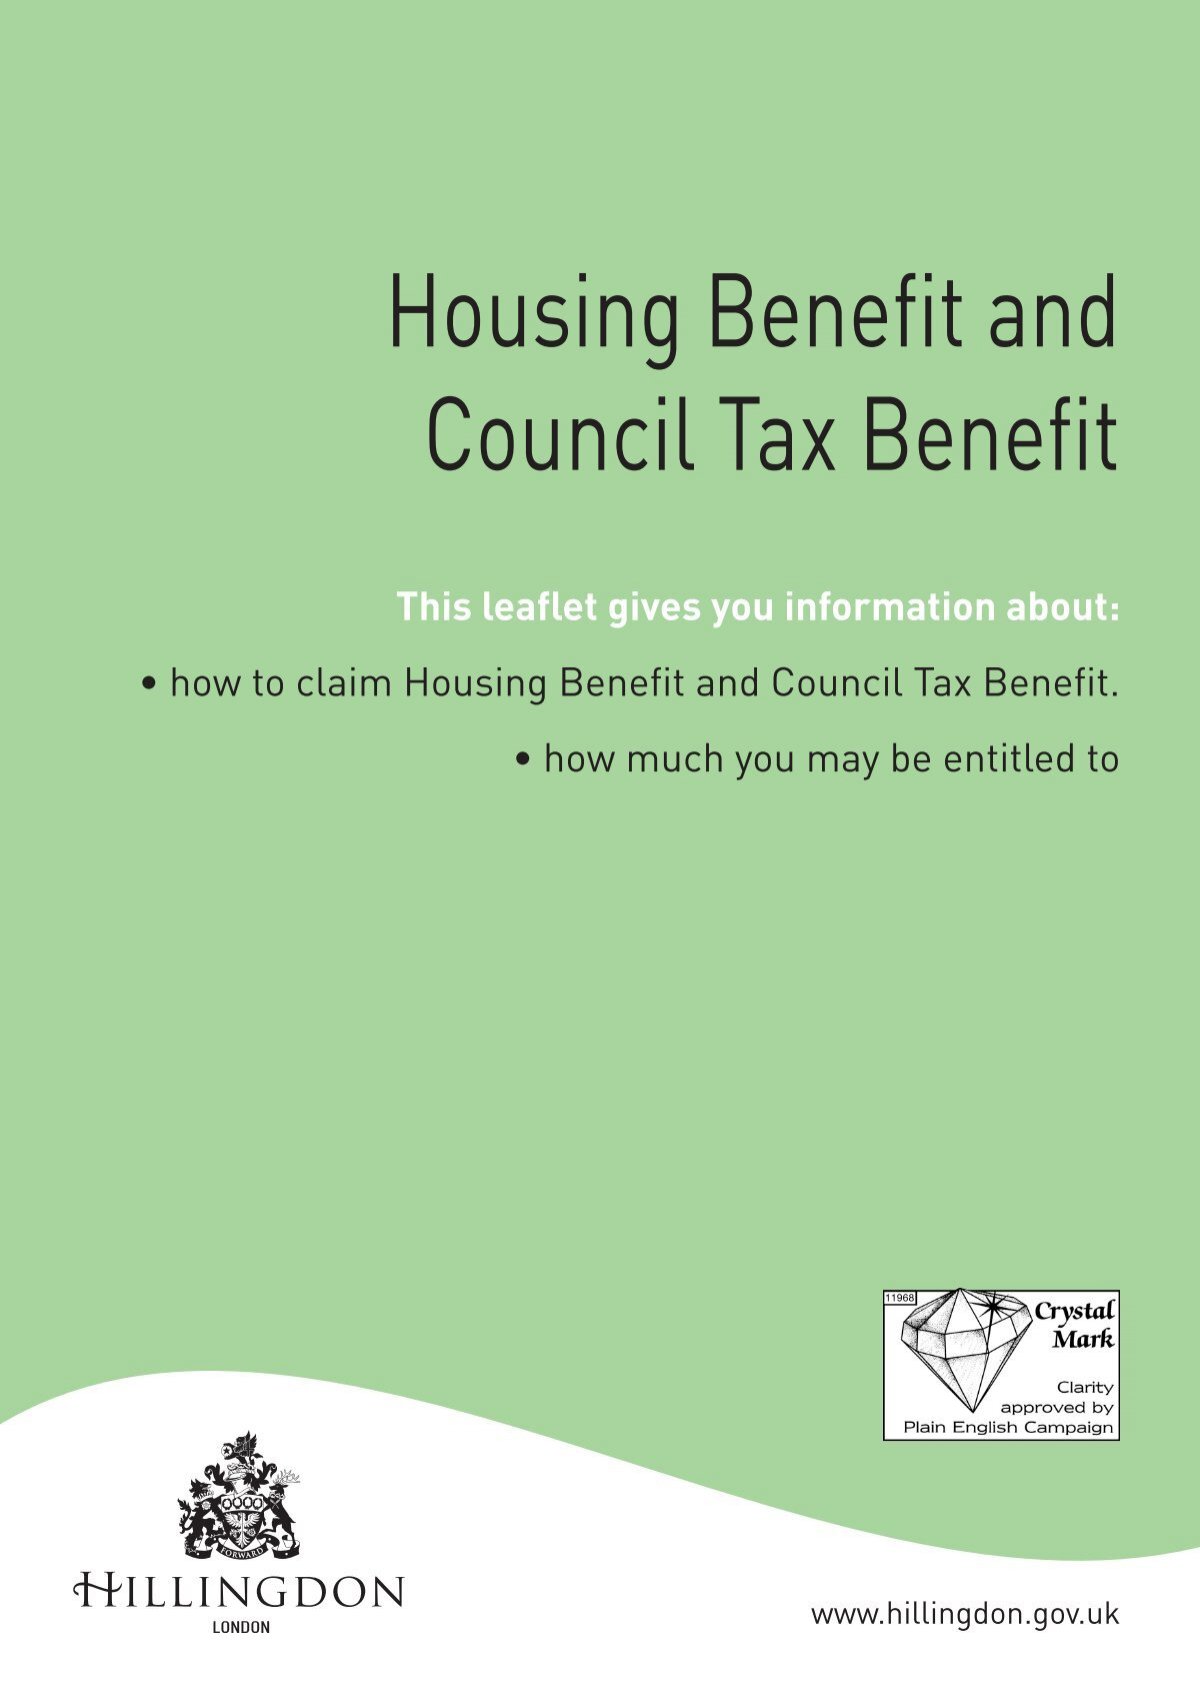 10368-housing-benefit-and-council-tax-benefit-information